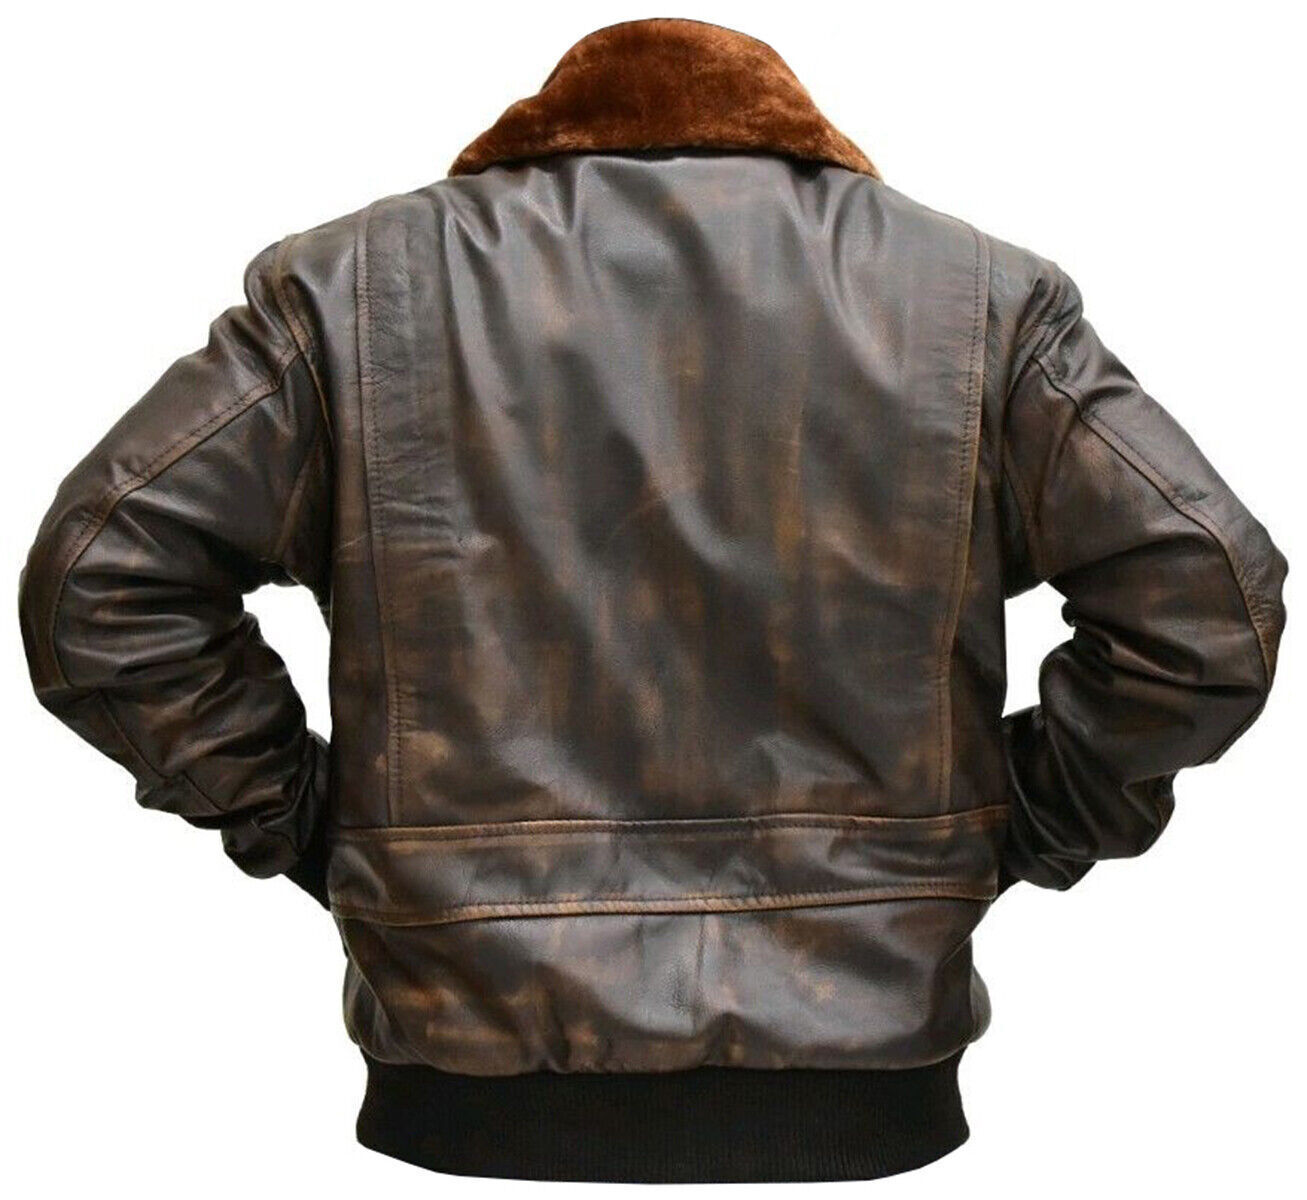 G-1 Aviator A-2 Real Bomber Flight Jacket Distressed Brown Men's Leather Jacket